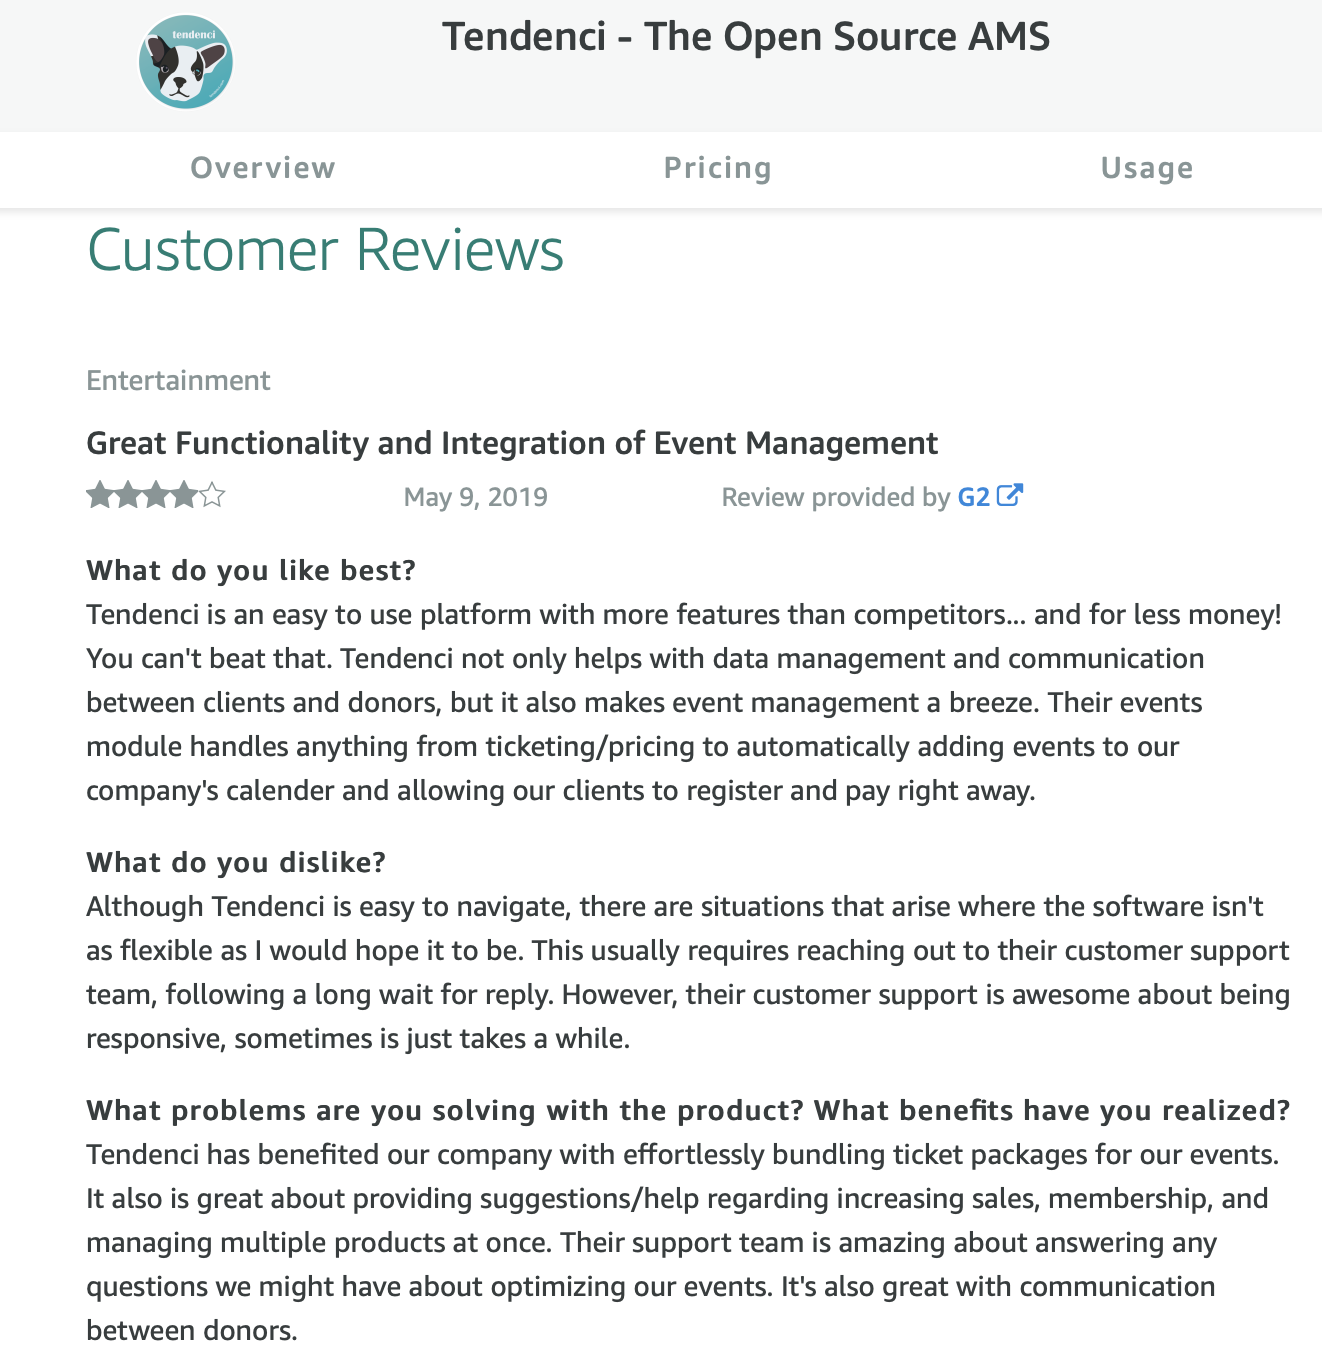 Tendenci AMI AWS Marketplace Product Review